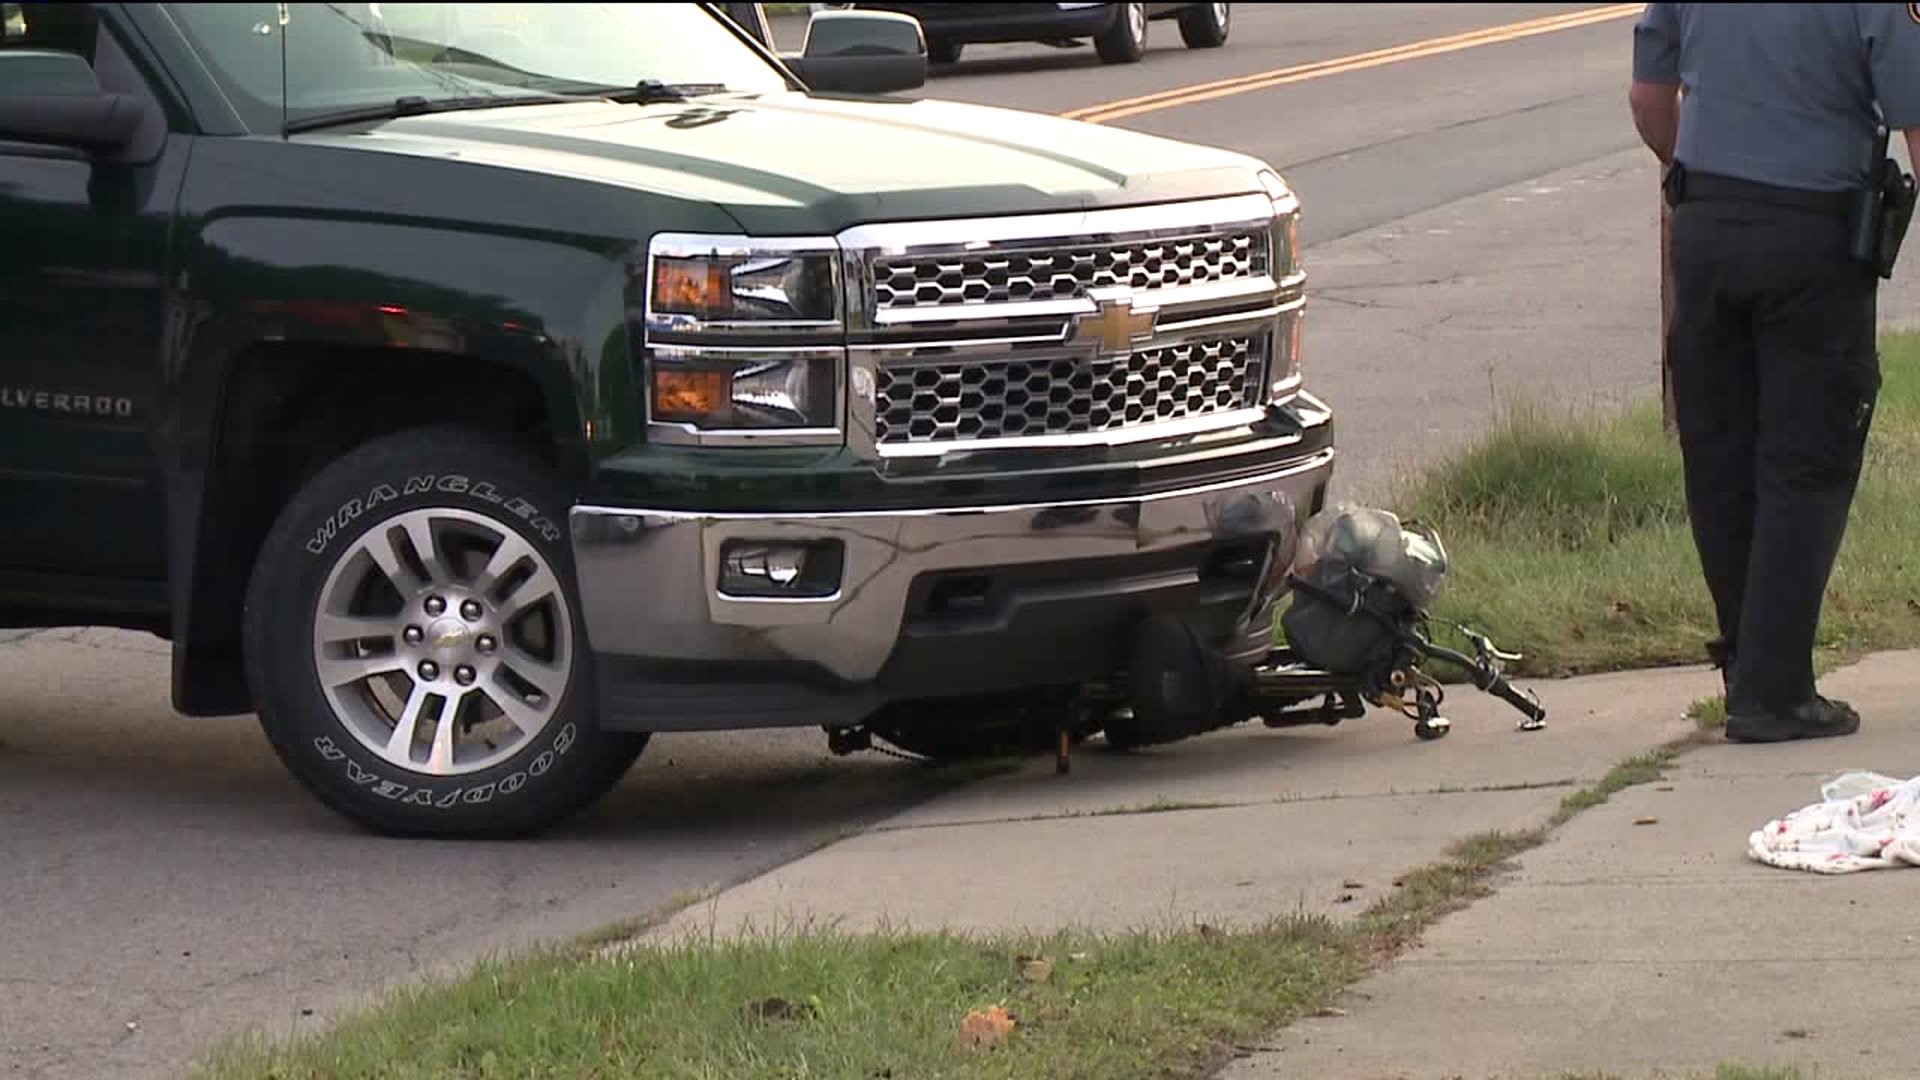 Bicyclist Hit by Pickup Truck